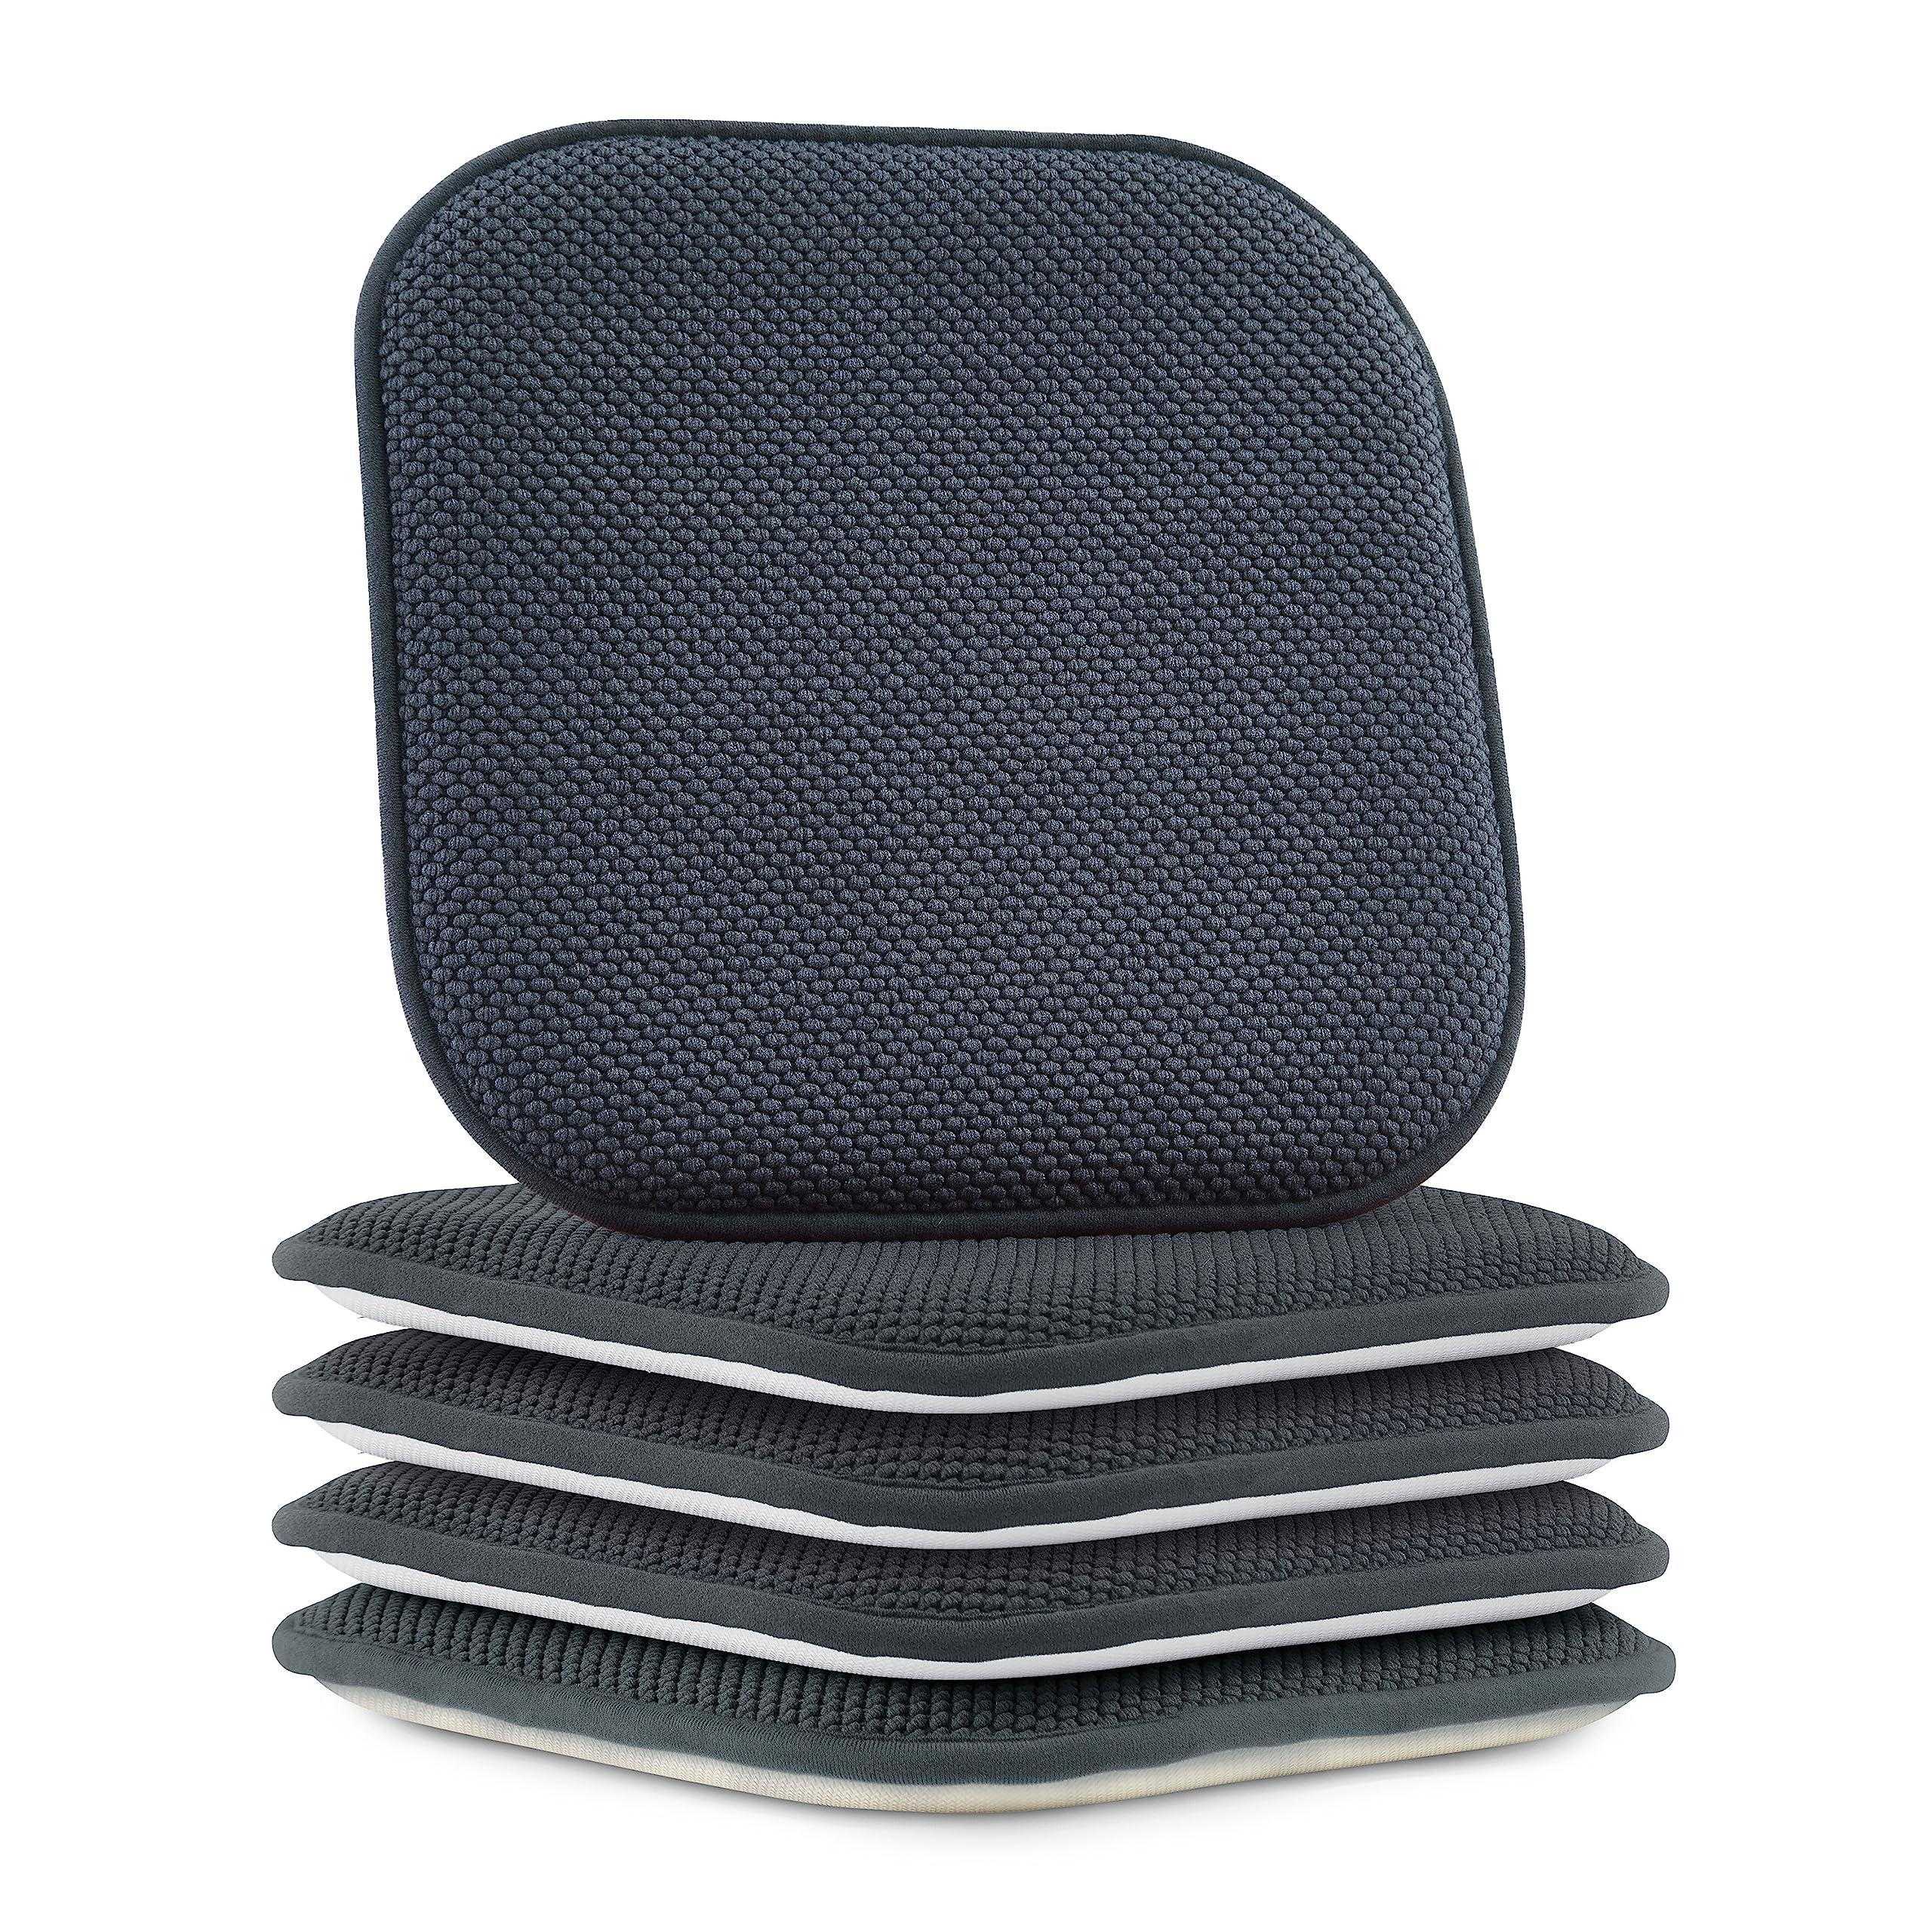 Elegant Comfort Chair Cushion Covers with Ties and Non Skid Rubber Backing-Thick Memory Foam - Soft Cushion Pad- Rounded Square Seat Cover-16 x 16 Inches- Honeycomb Textured Pattern, Set of 4, Gray